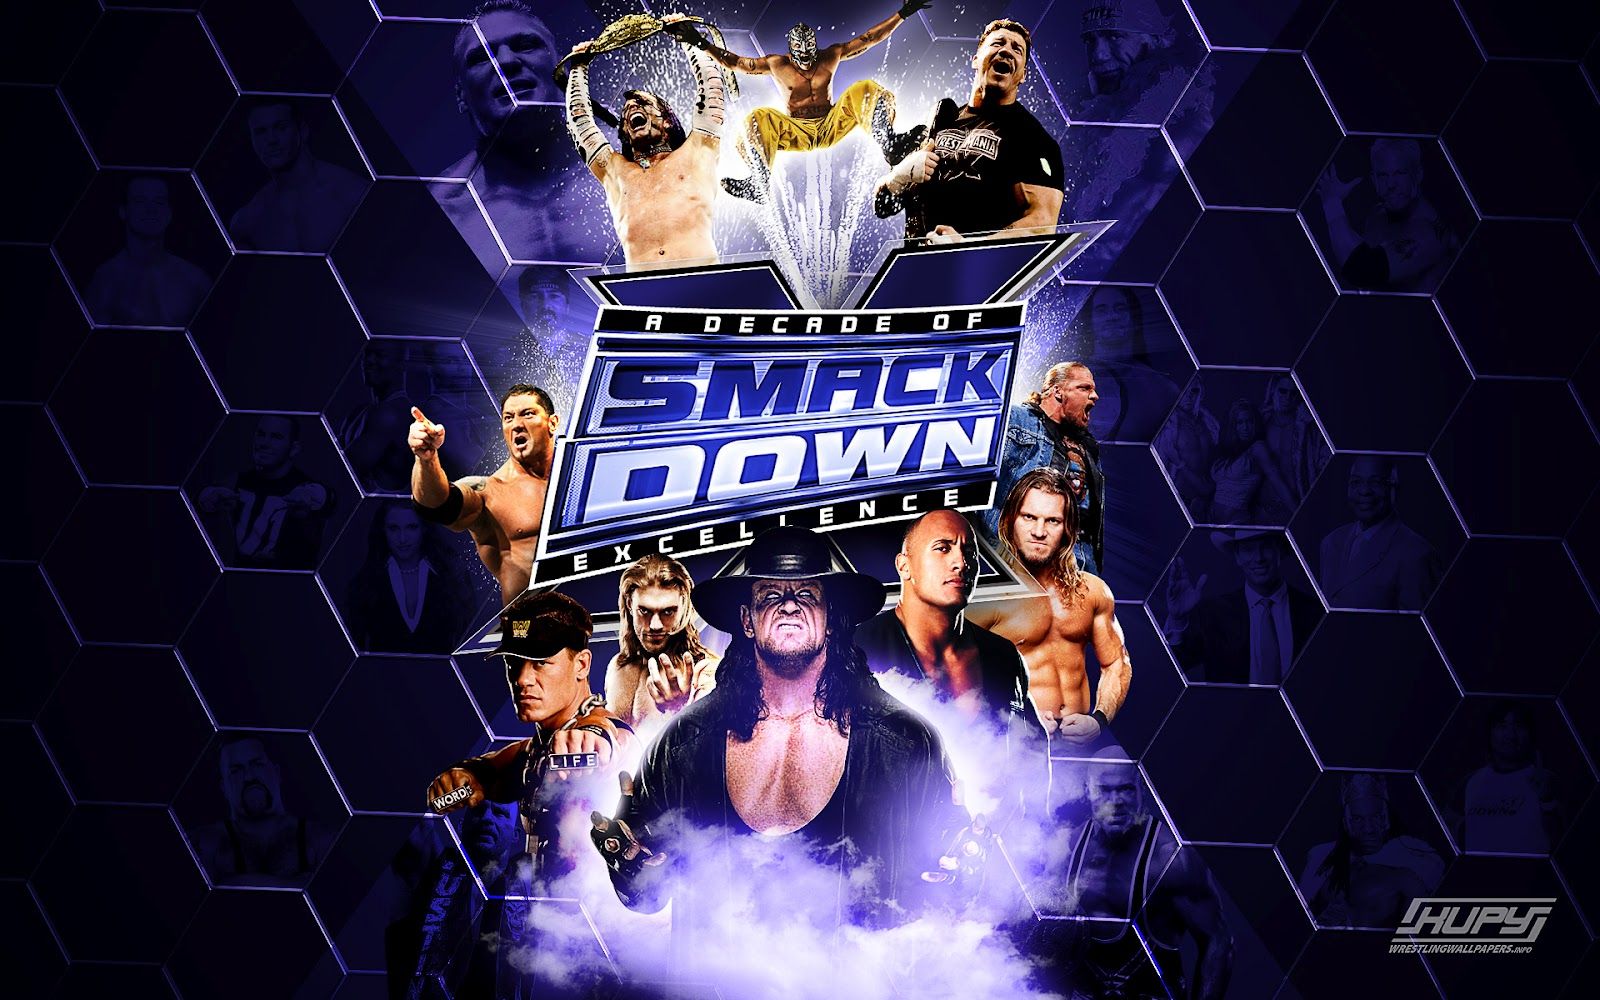 1600x1000 Free Download Wwe Wallpapers Smackdown Smackdown Wallpaper 1600x1000 For Your Desktop Mobile Tablet Explore Smackdown Wallpaper Smackdown Wallpaper Smackdown Wallpaper Wwe Smackdown Wallpaper